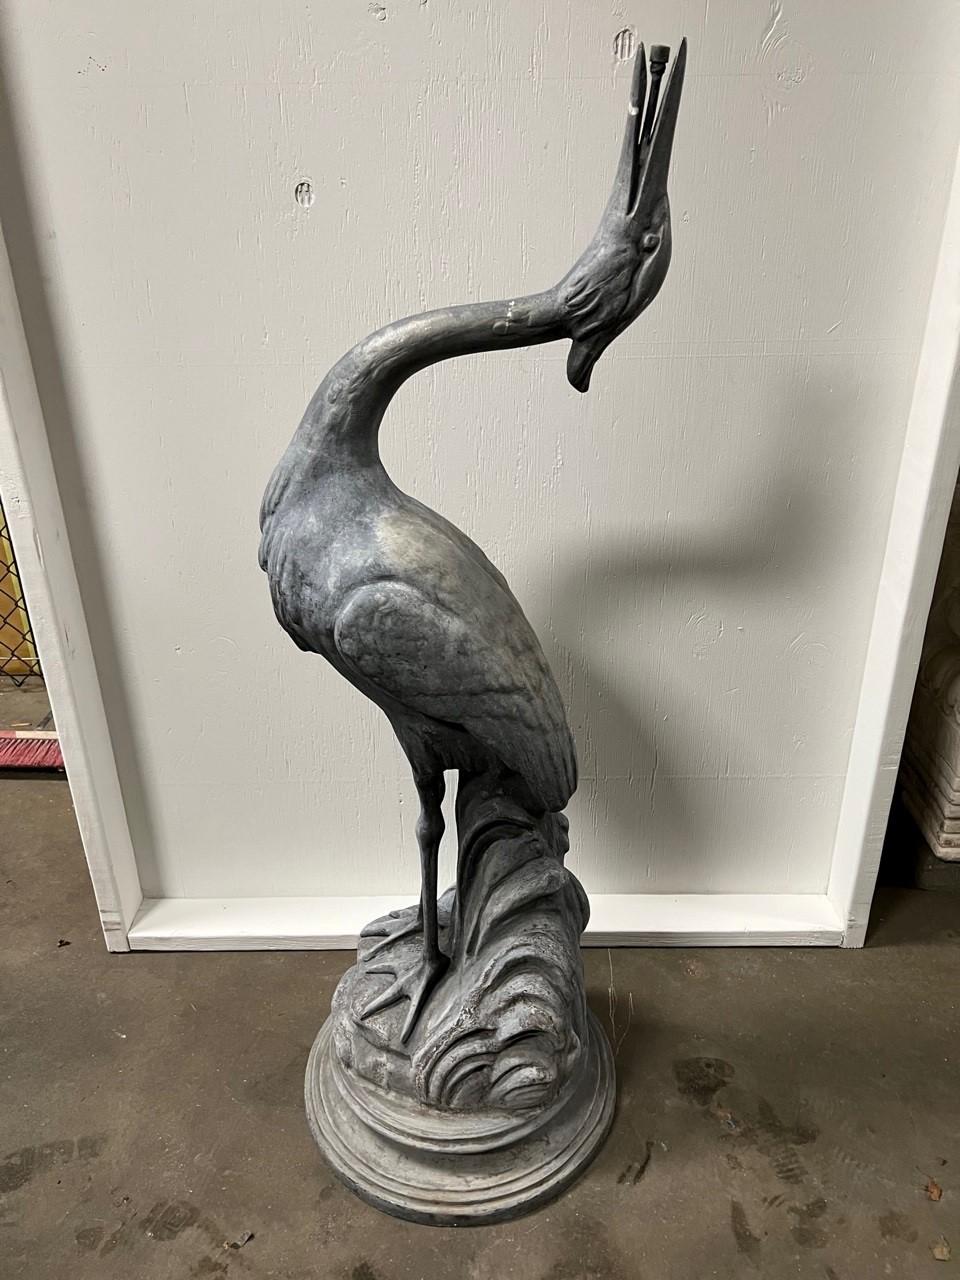 A spectacular antique lead Crane fountain from a famous New Jersey Estate. I believe it was purchased in Italy in the late 1940s early 50s. The Fort Lee mansion was built by mob kingpin Albert Anastasia in 1947. The crane sat in a bronze fountain